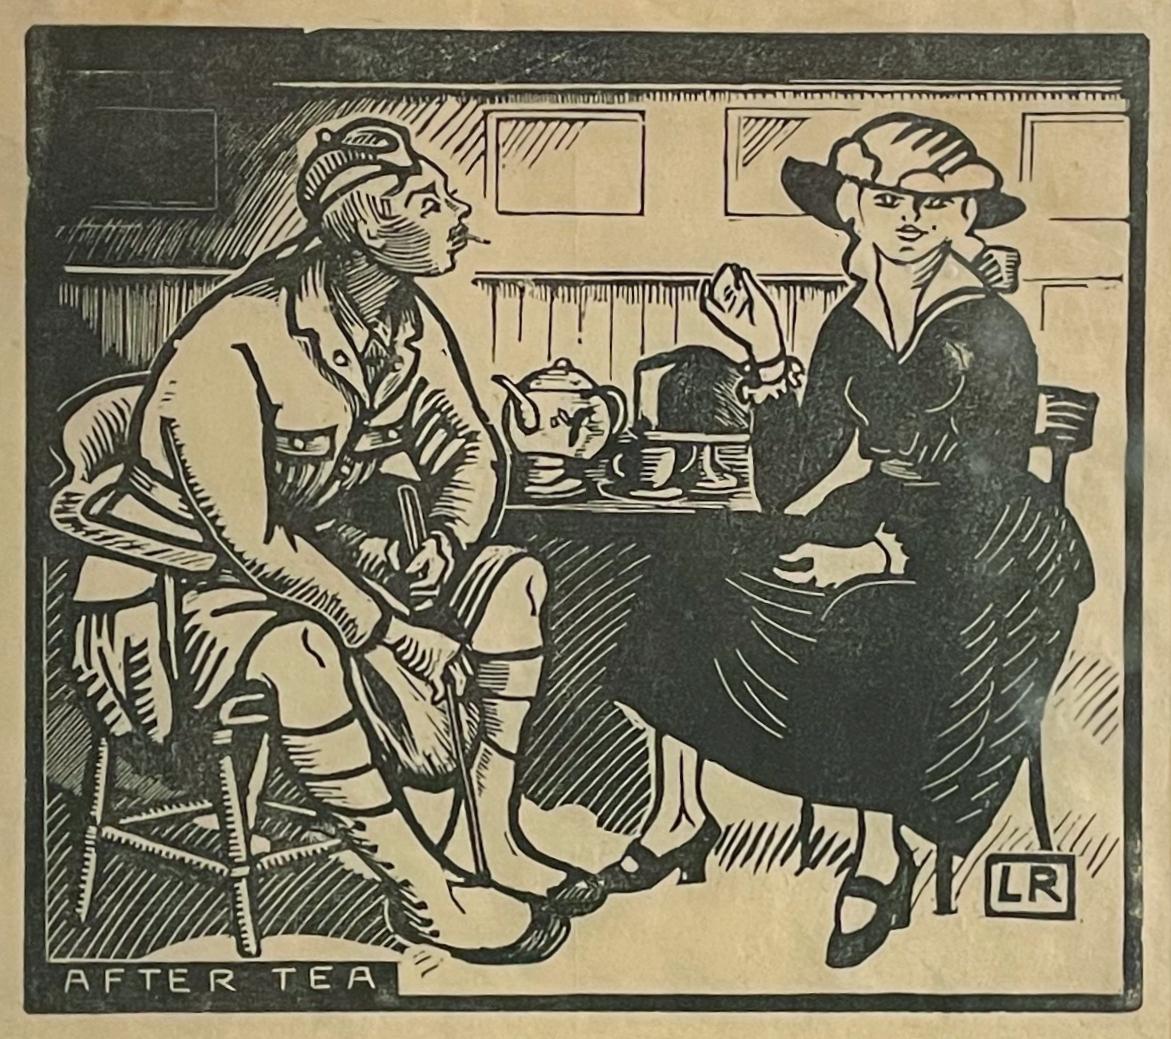 After Tea by Ludovic-Rodo Pissarro (1878-1952)
Wood engraving
12 x 13.2 cm (4 ³/₄ x 5 ¹/₄ inches)
Initialled and titled in the plate
Executed circa 1917

Artist biography
Ludovic-Rodolphe Pissarro, born in Paris in 1878, was Camille Pissarro’s